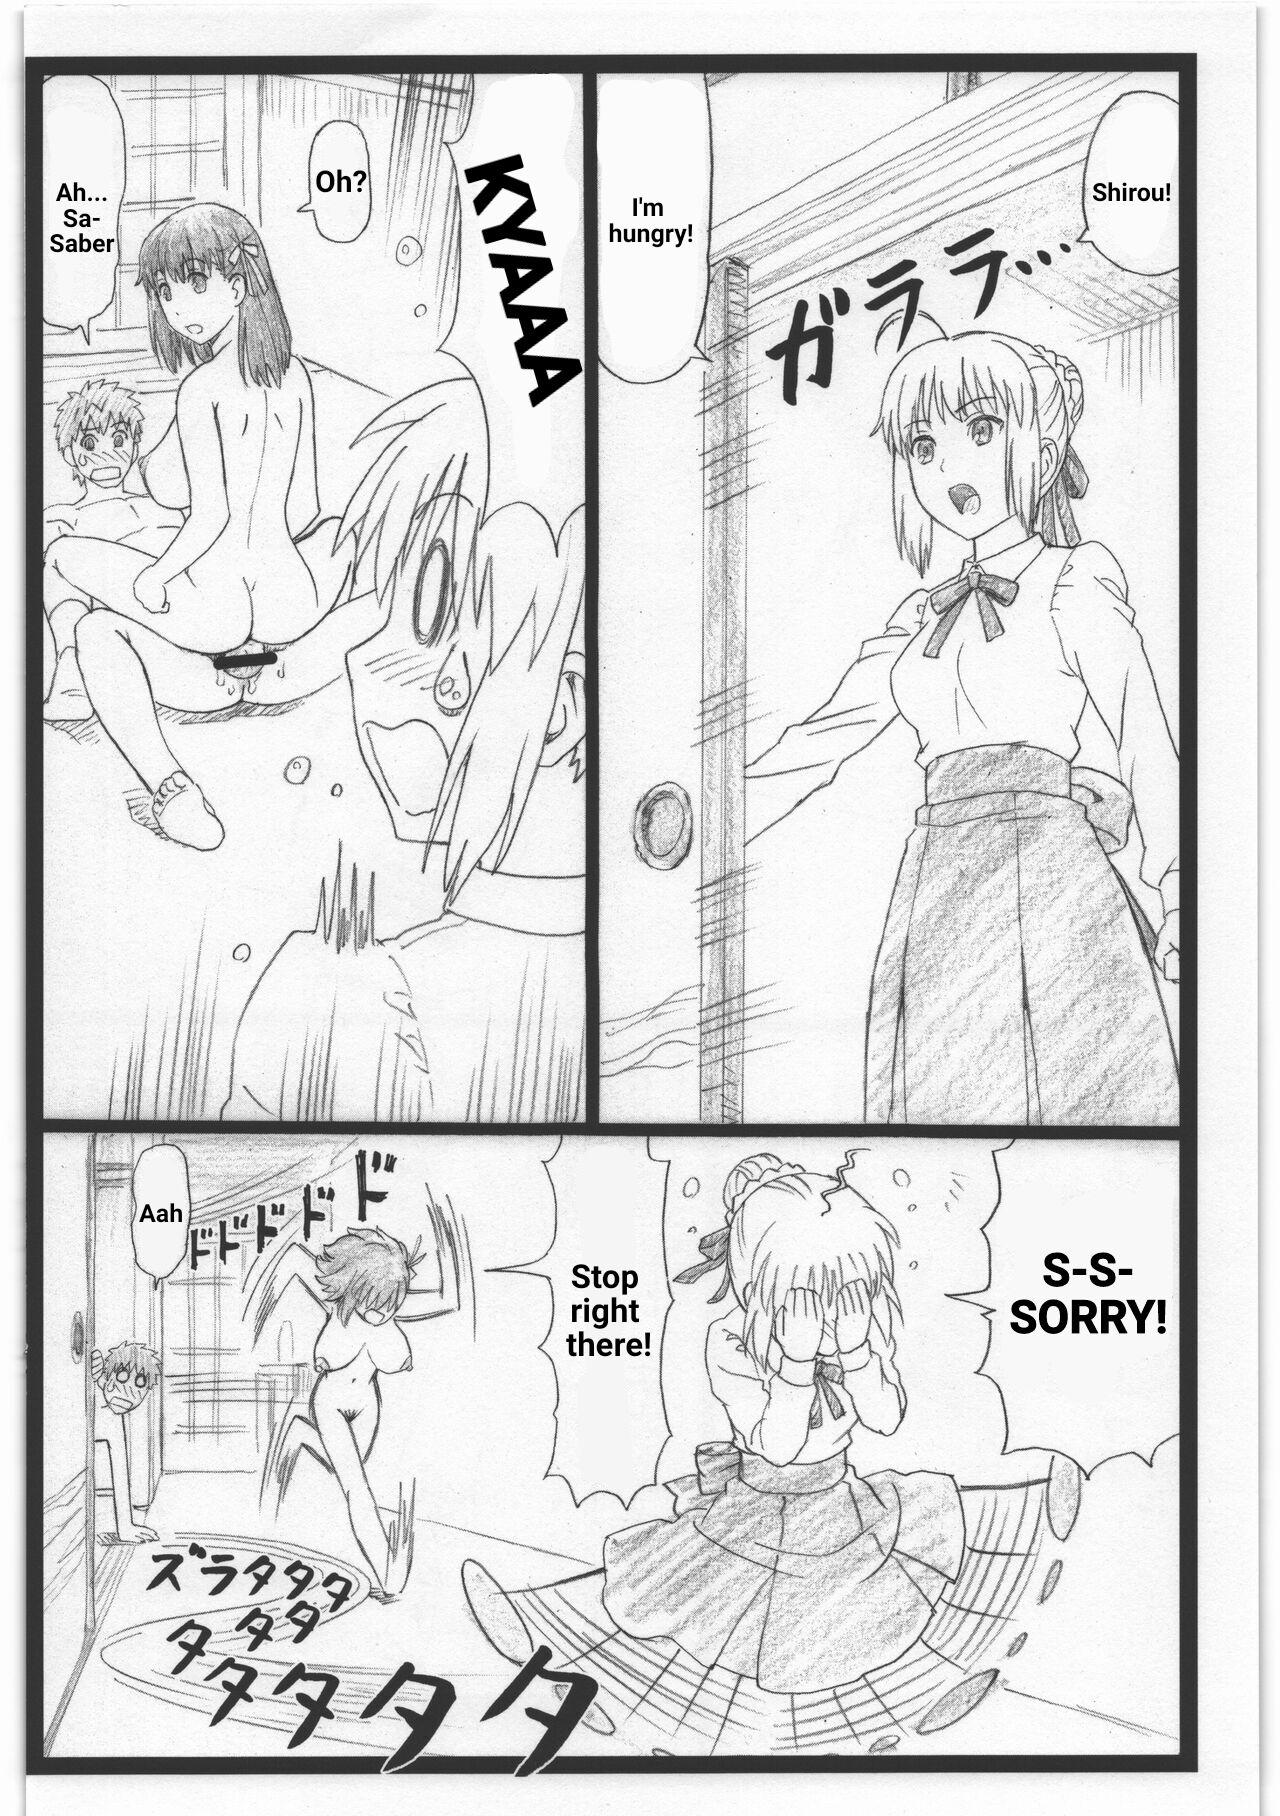 Holes C88 Omakebon - Fate stay night Brazilian - Page 4